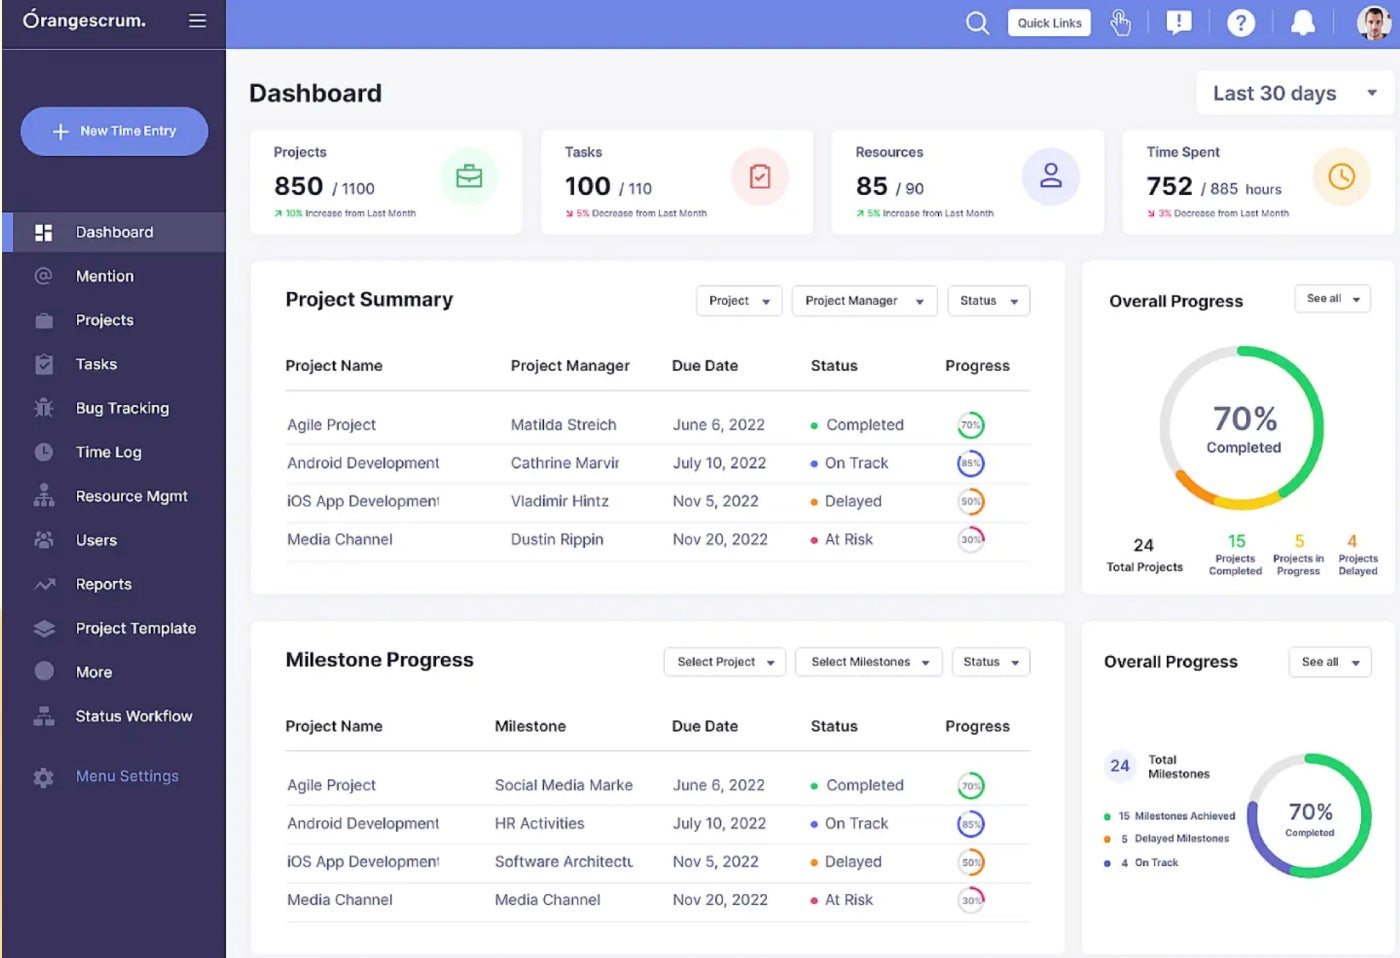 The project dashboard in Orangescrum.